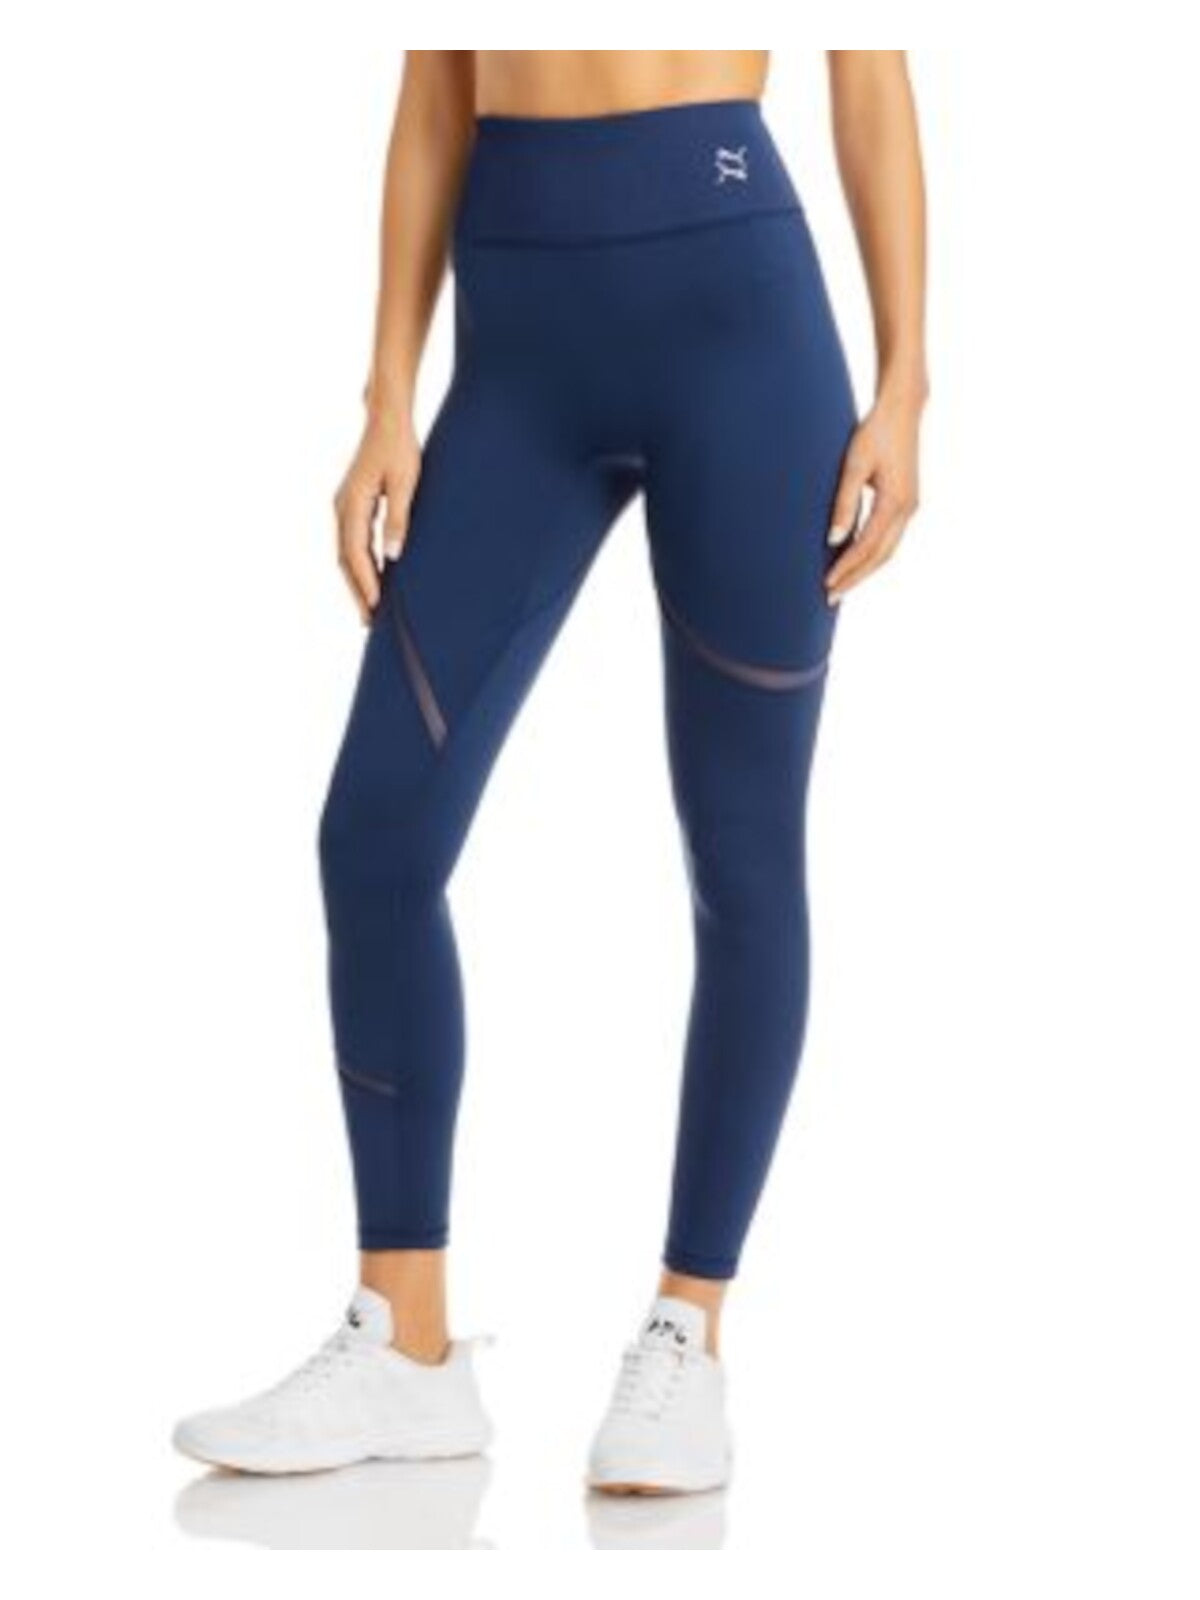 PUMA Womens Navy Stretch Pocketed Mesh Inset Ribbed Waistband Active Wear Skinny Leggings XS